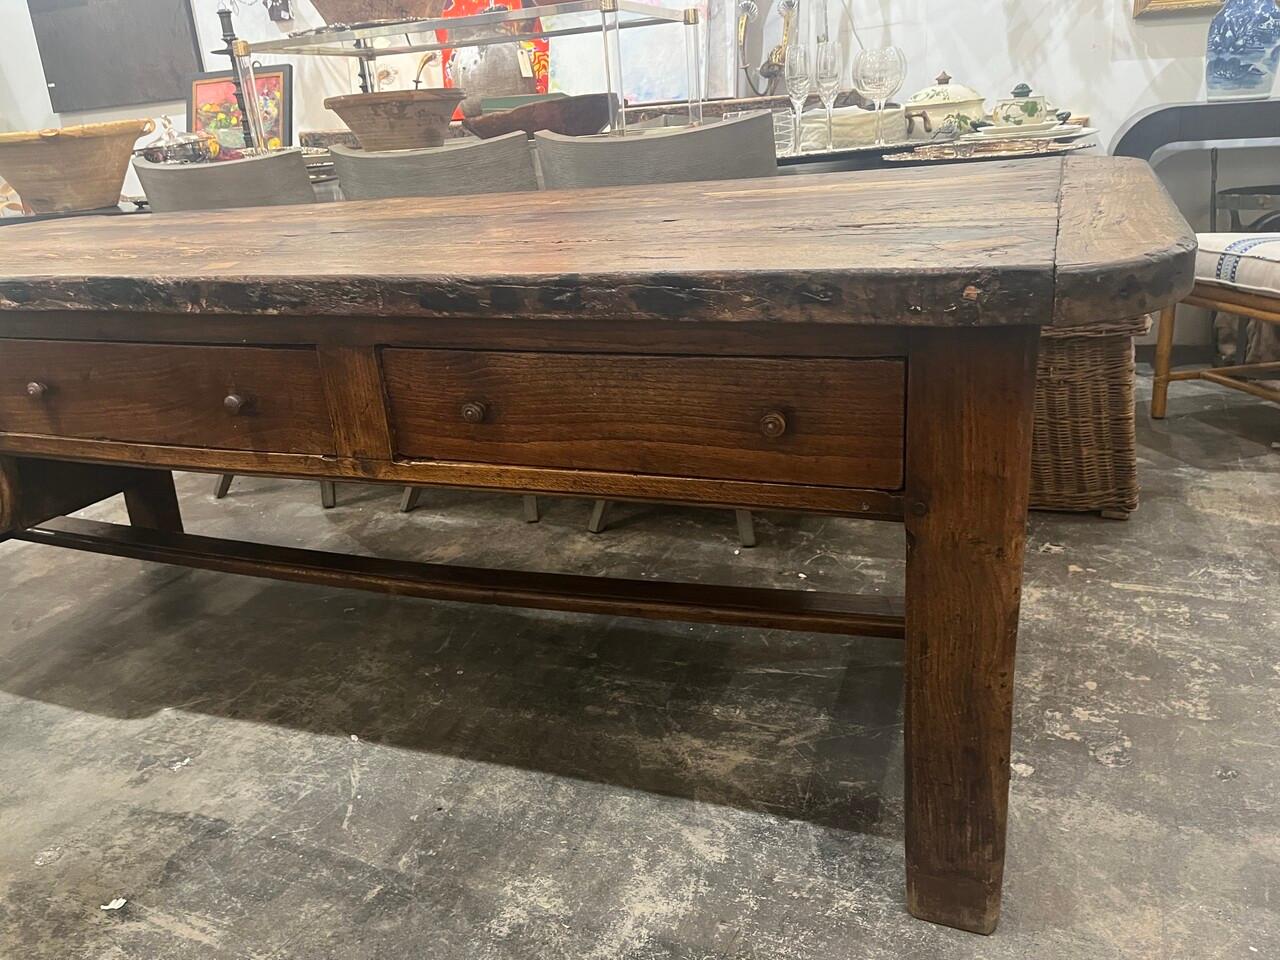 Transport yourself back to the charming ambiance of 17th-century France with this exquisite Rustic Antique French Oak Baker/Work Table. Crafted with timeless elegance and sturdy oak, it bears the marks of age and artisanal craftsmanship, adding